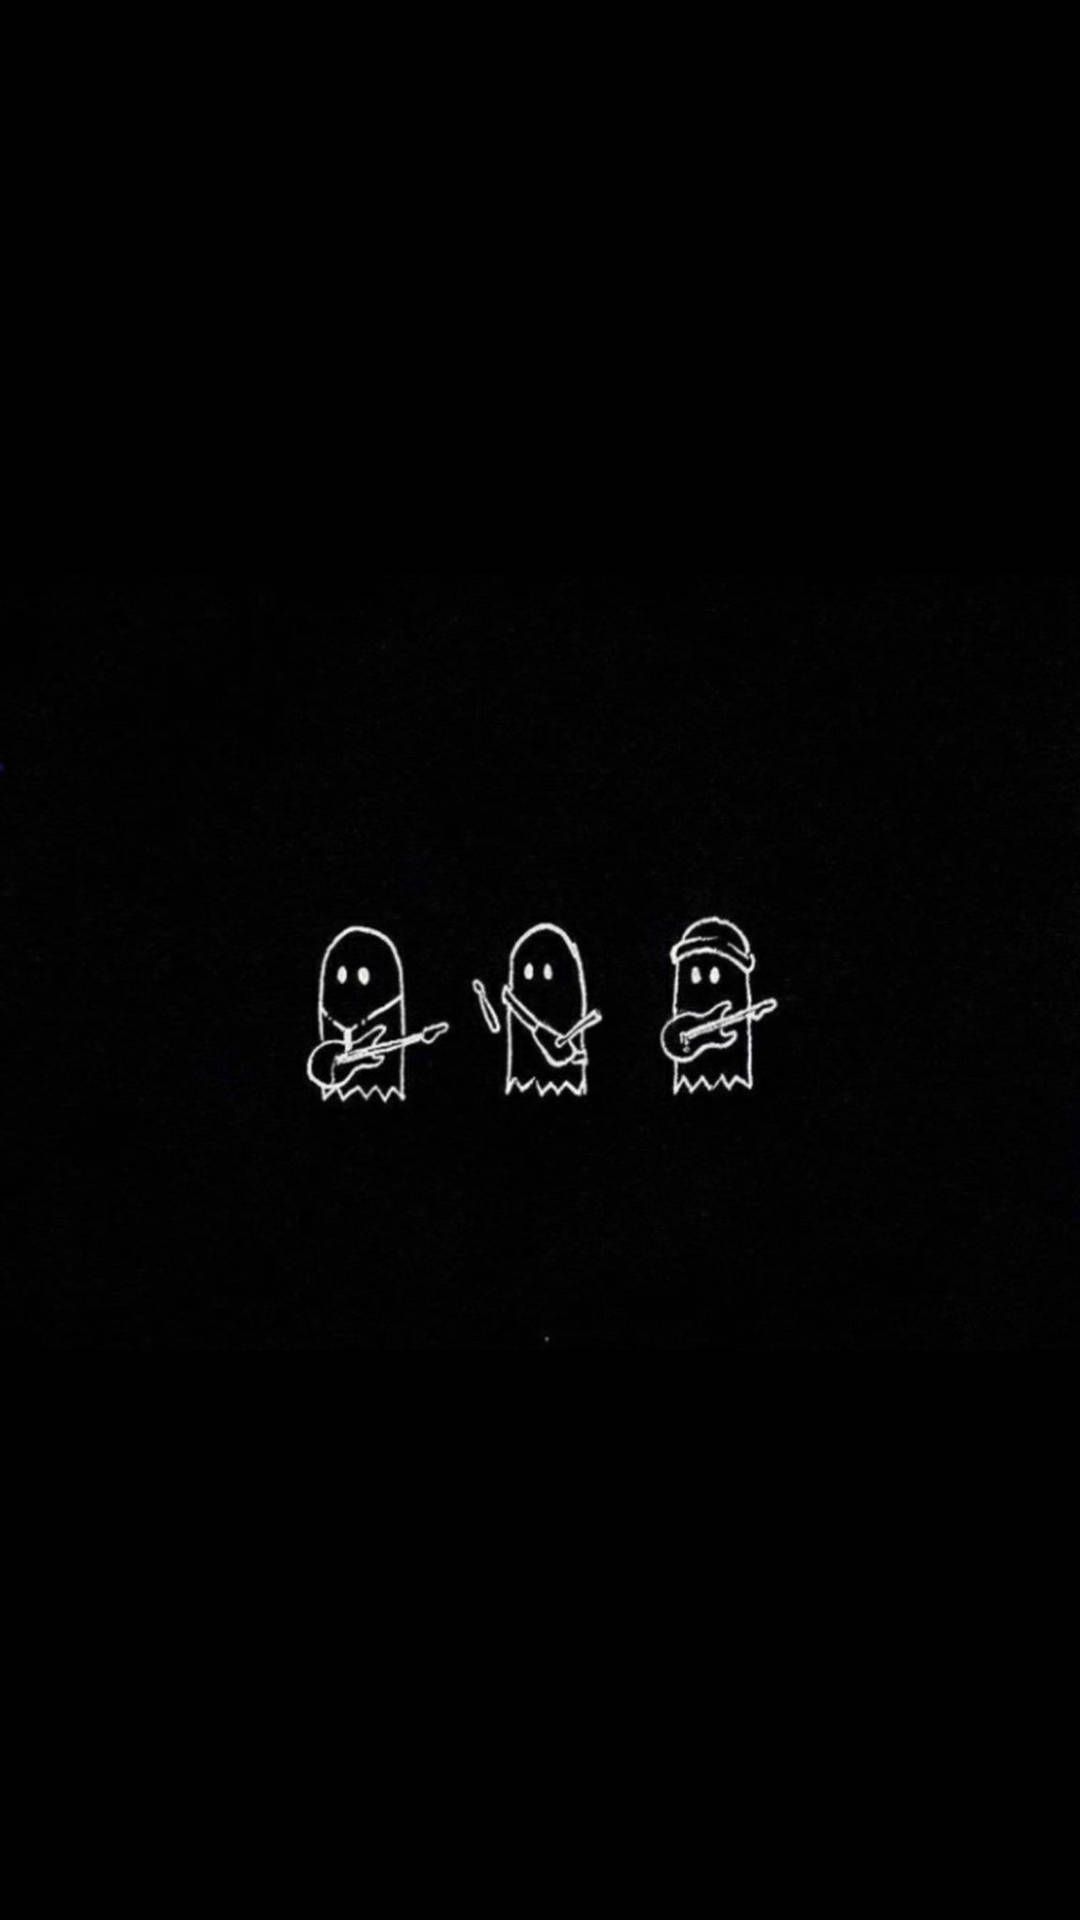 A black wall with three white drawings on it - Ghost